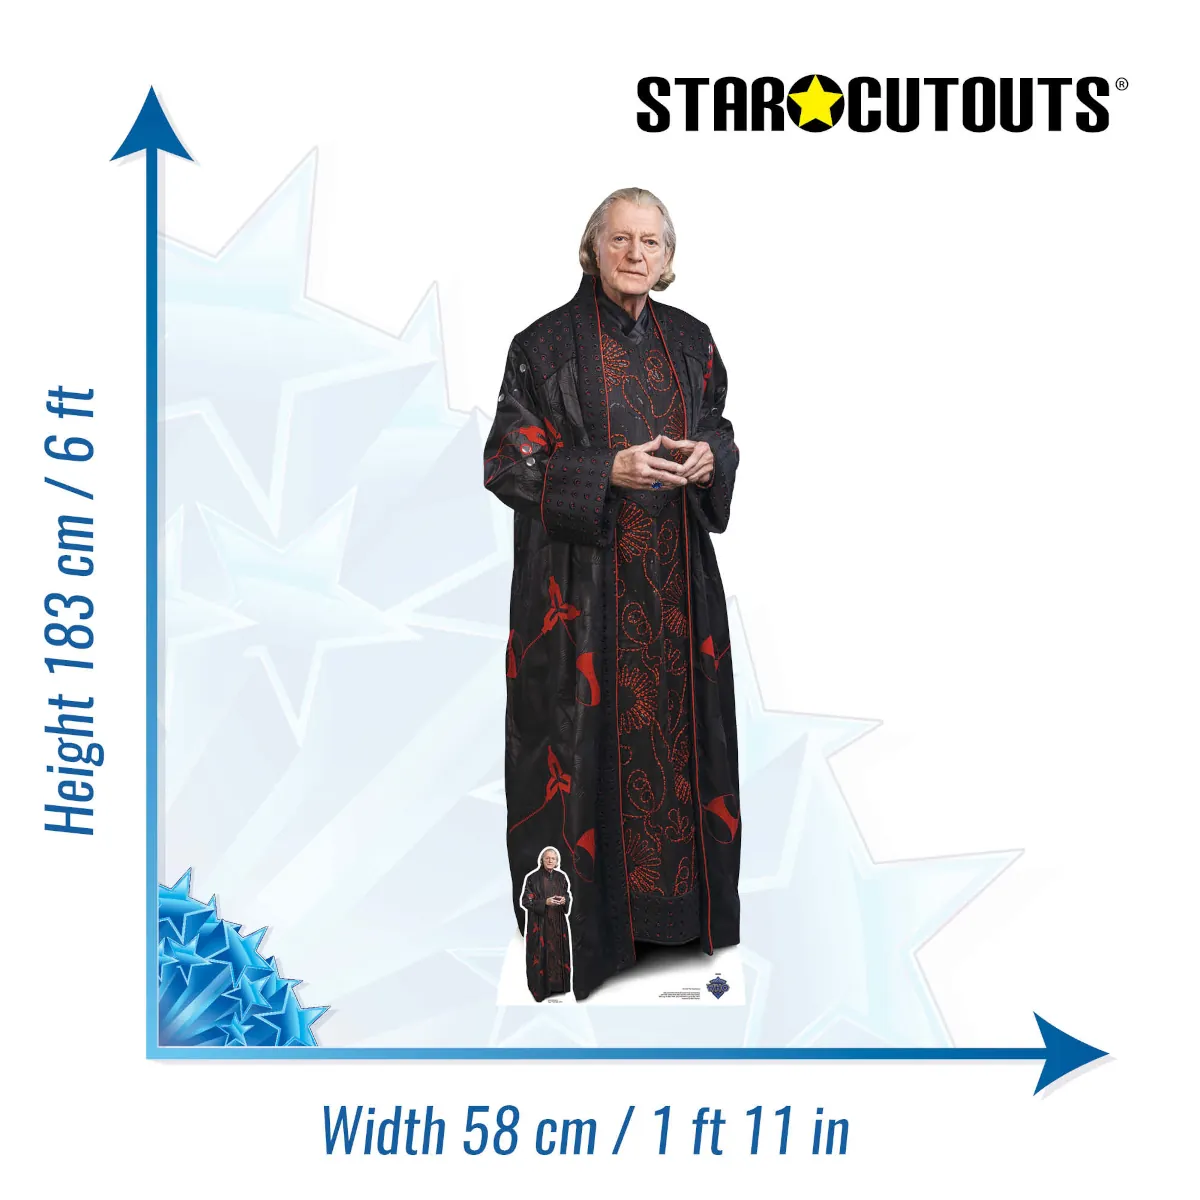 SC4192 The First Doctor 'David Bradley' (Doctor Who) Lifesize + Mini Cardboard Cutout Standee Size